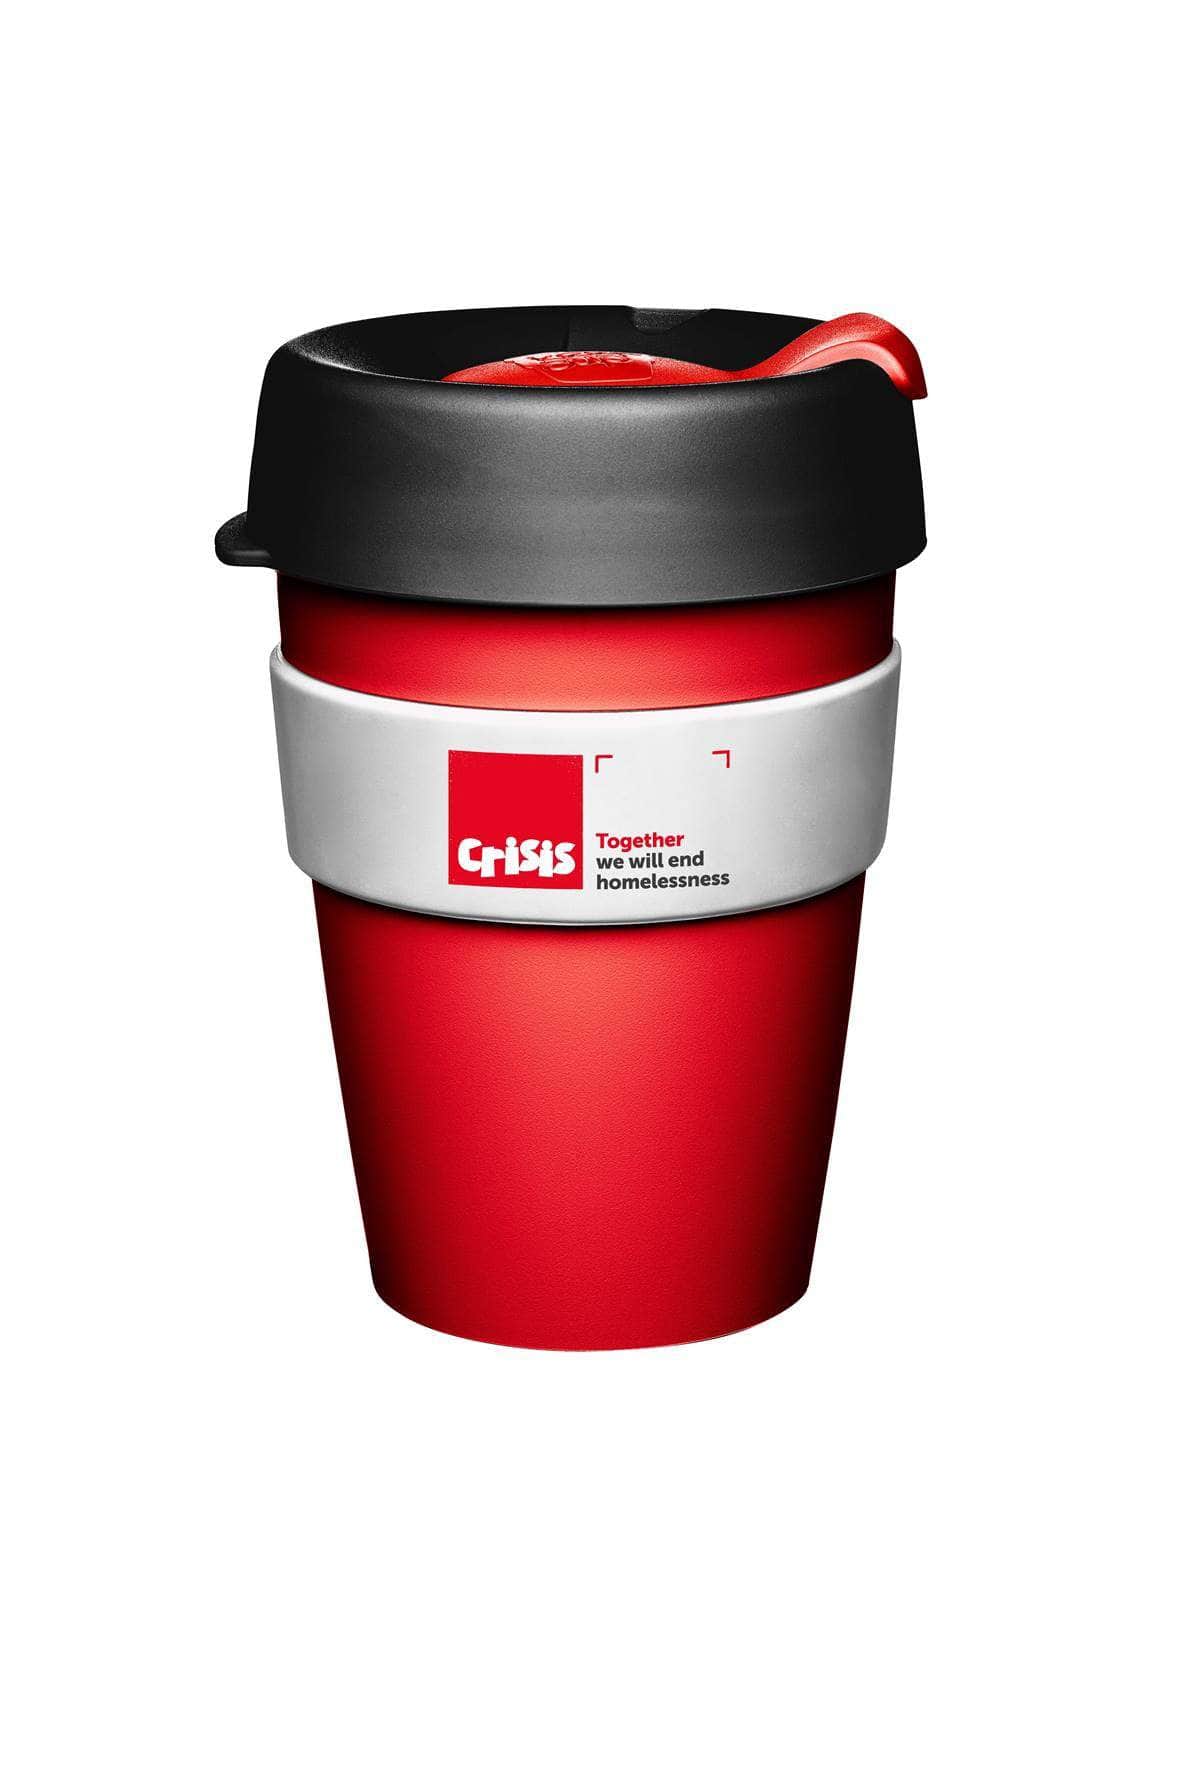 KeepCup Re-usable Plastic Coffee Cup